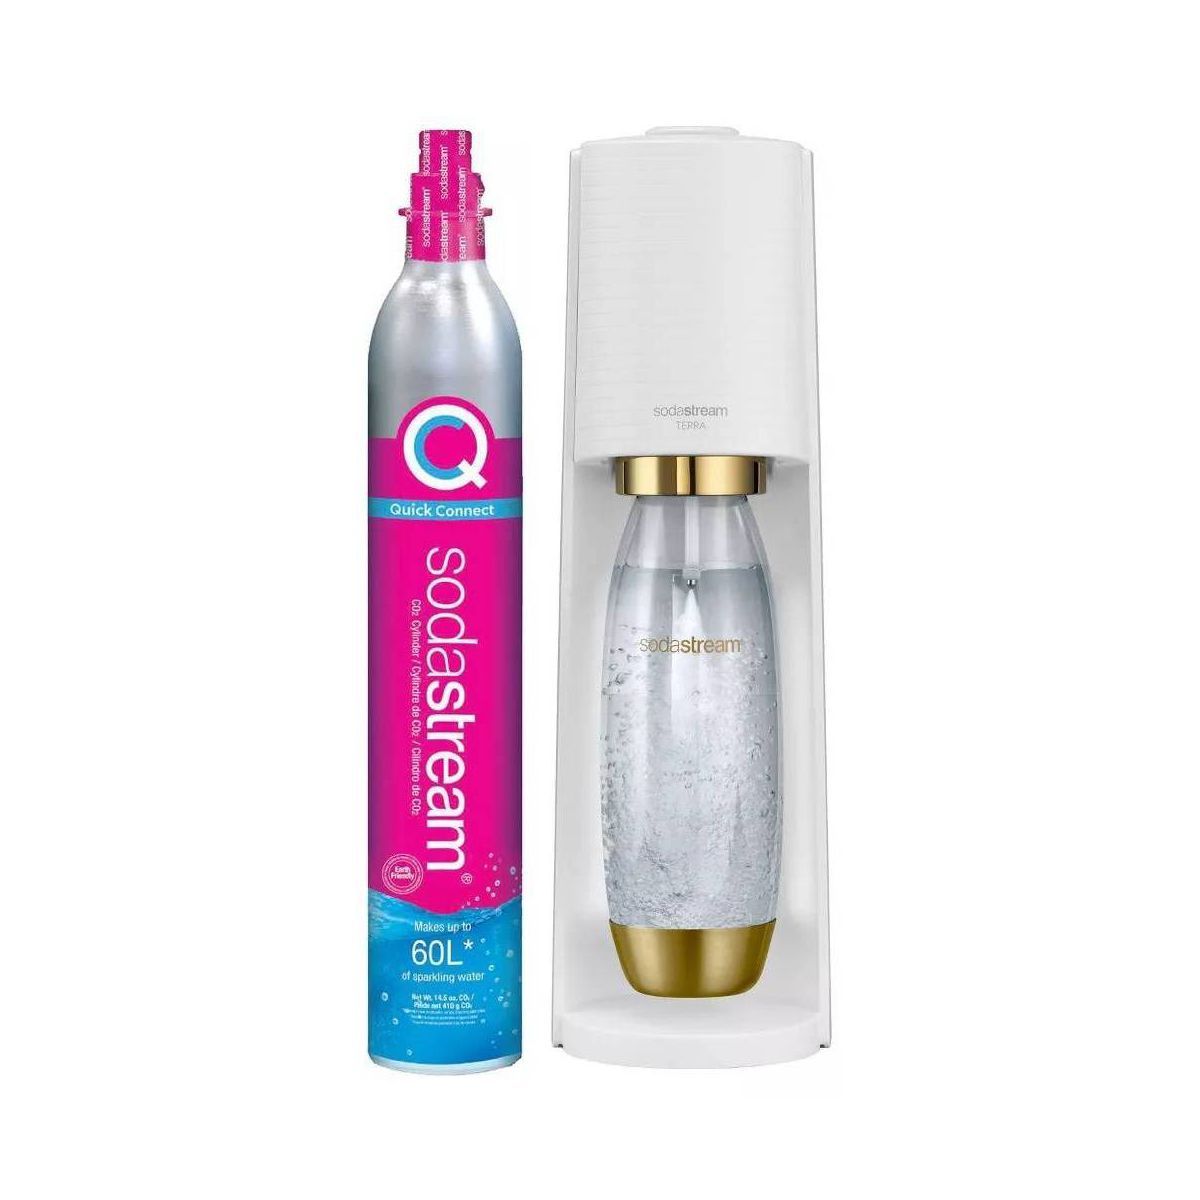 SodaStream Terra Sparkling Water Maker with CO2 and Carbonating Bottle | Target